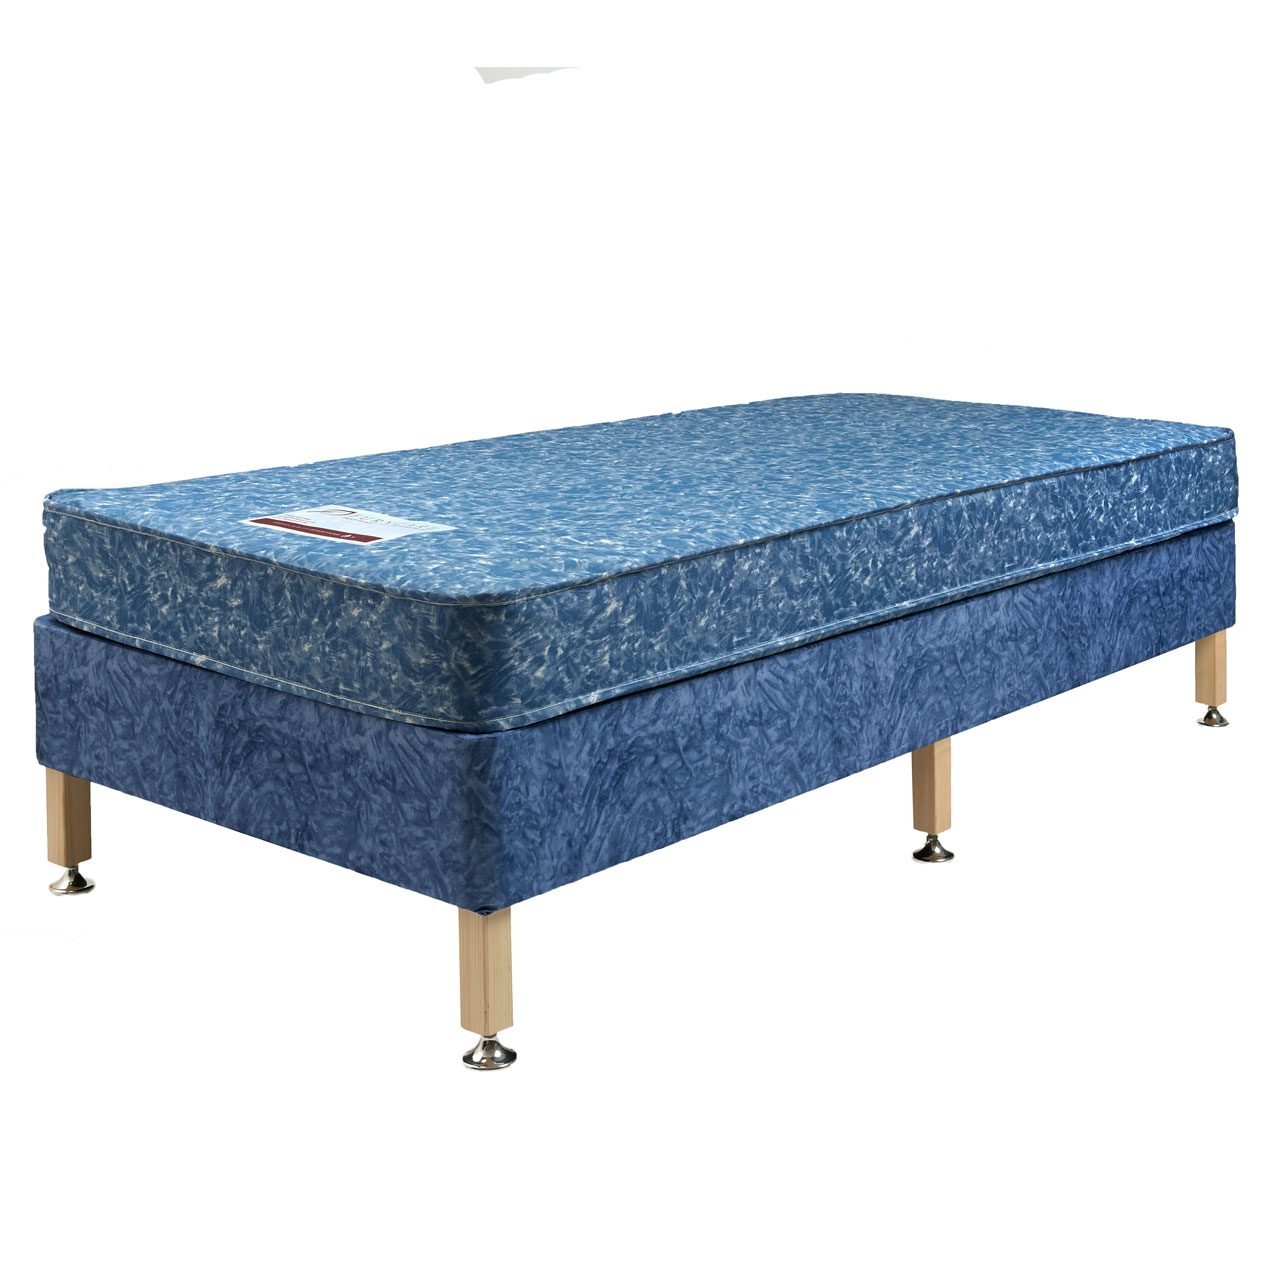 Single Verna Bed Base With Vapour Permeable Cover